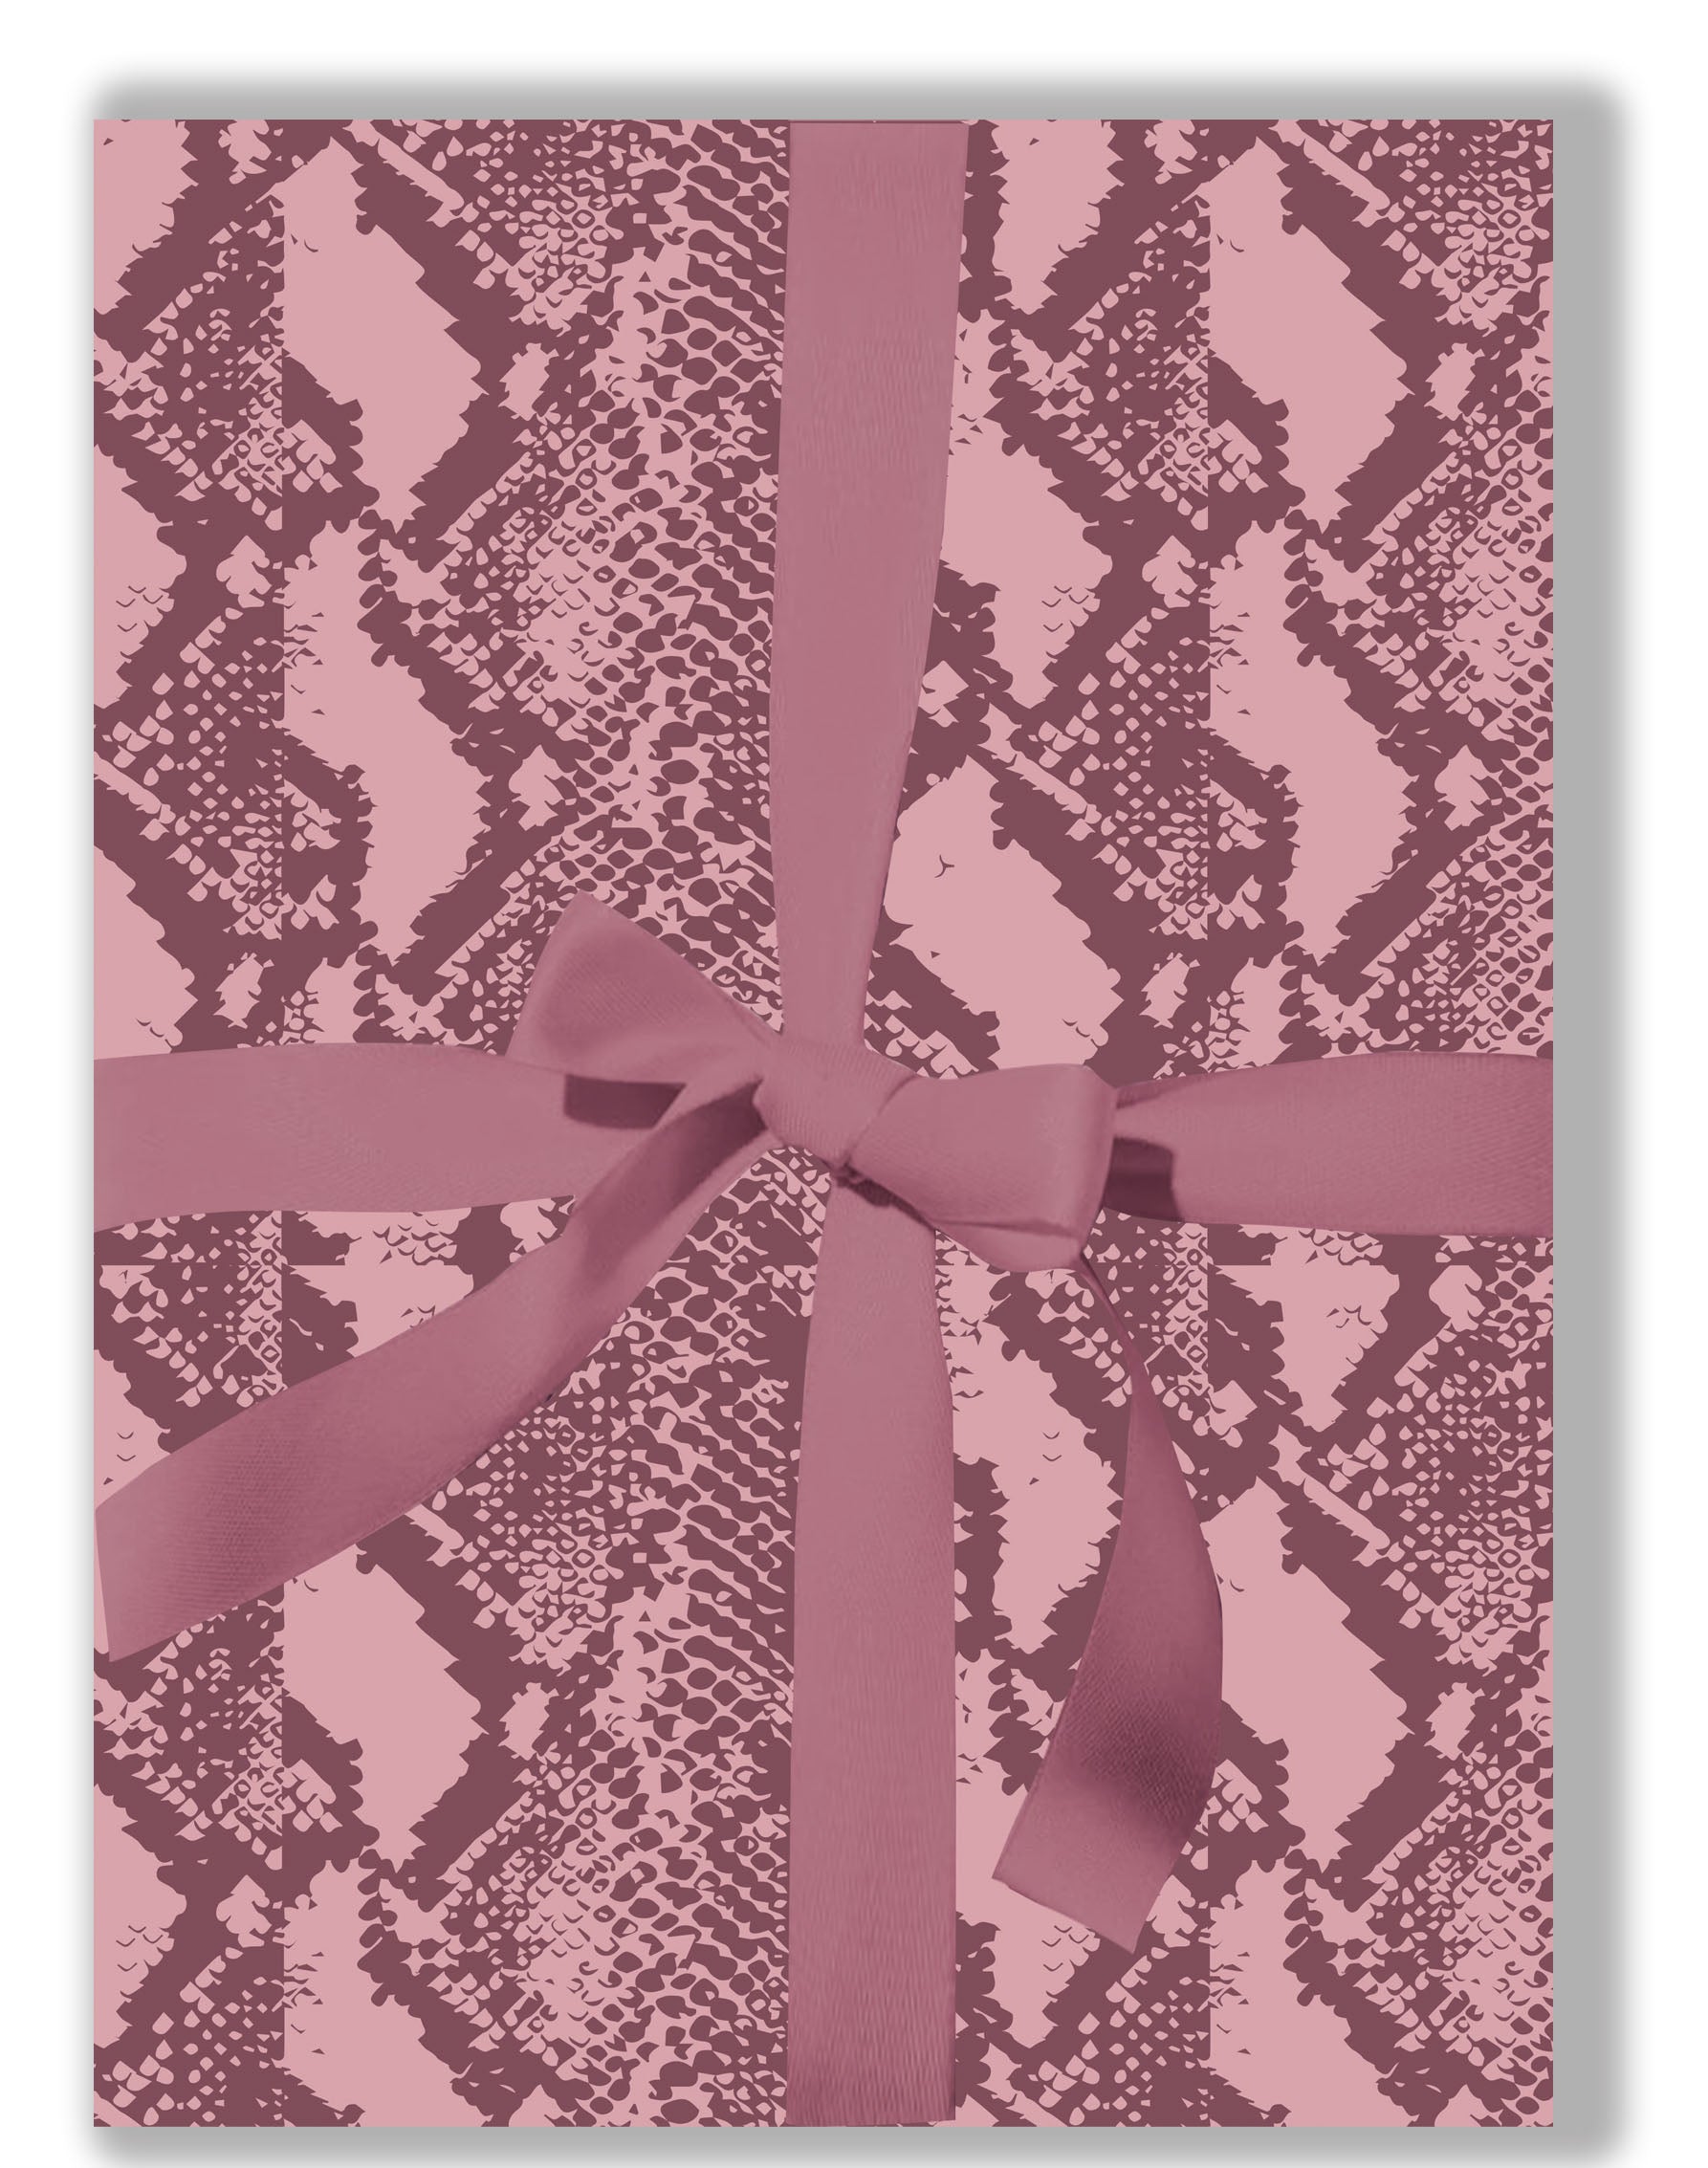 Snakeskin mauve wrapping paper